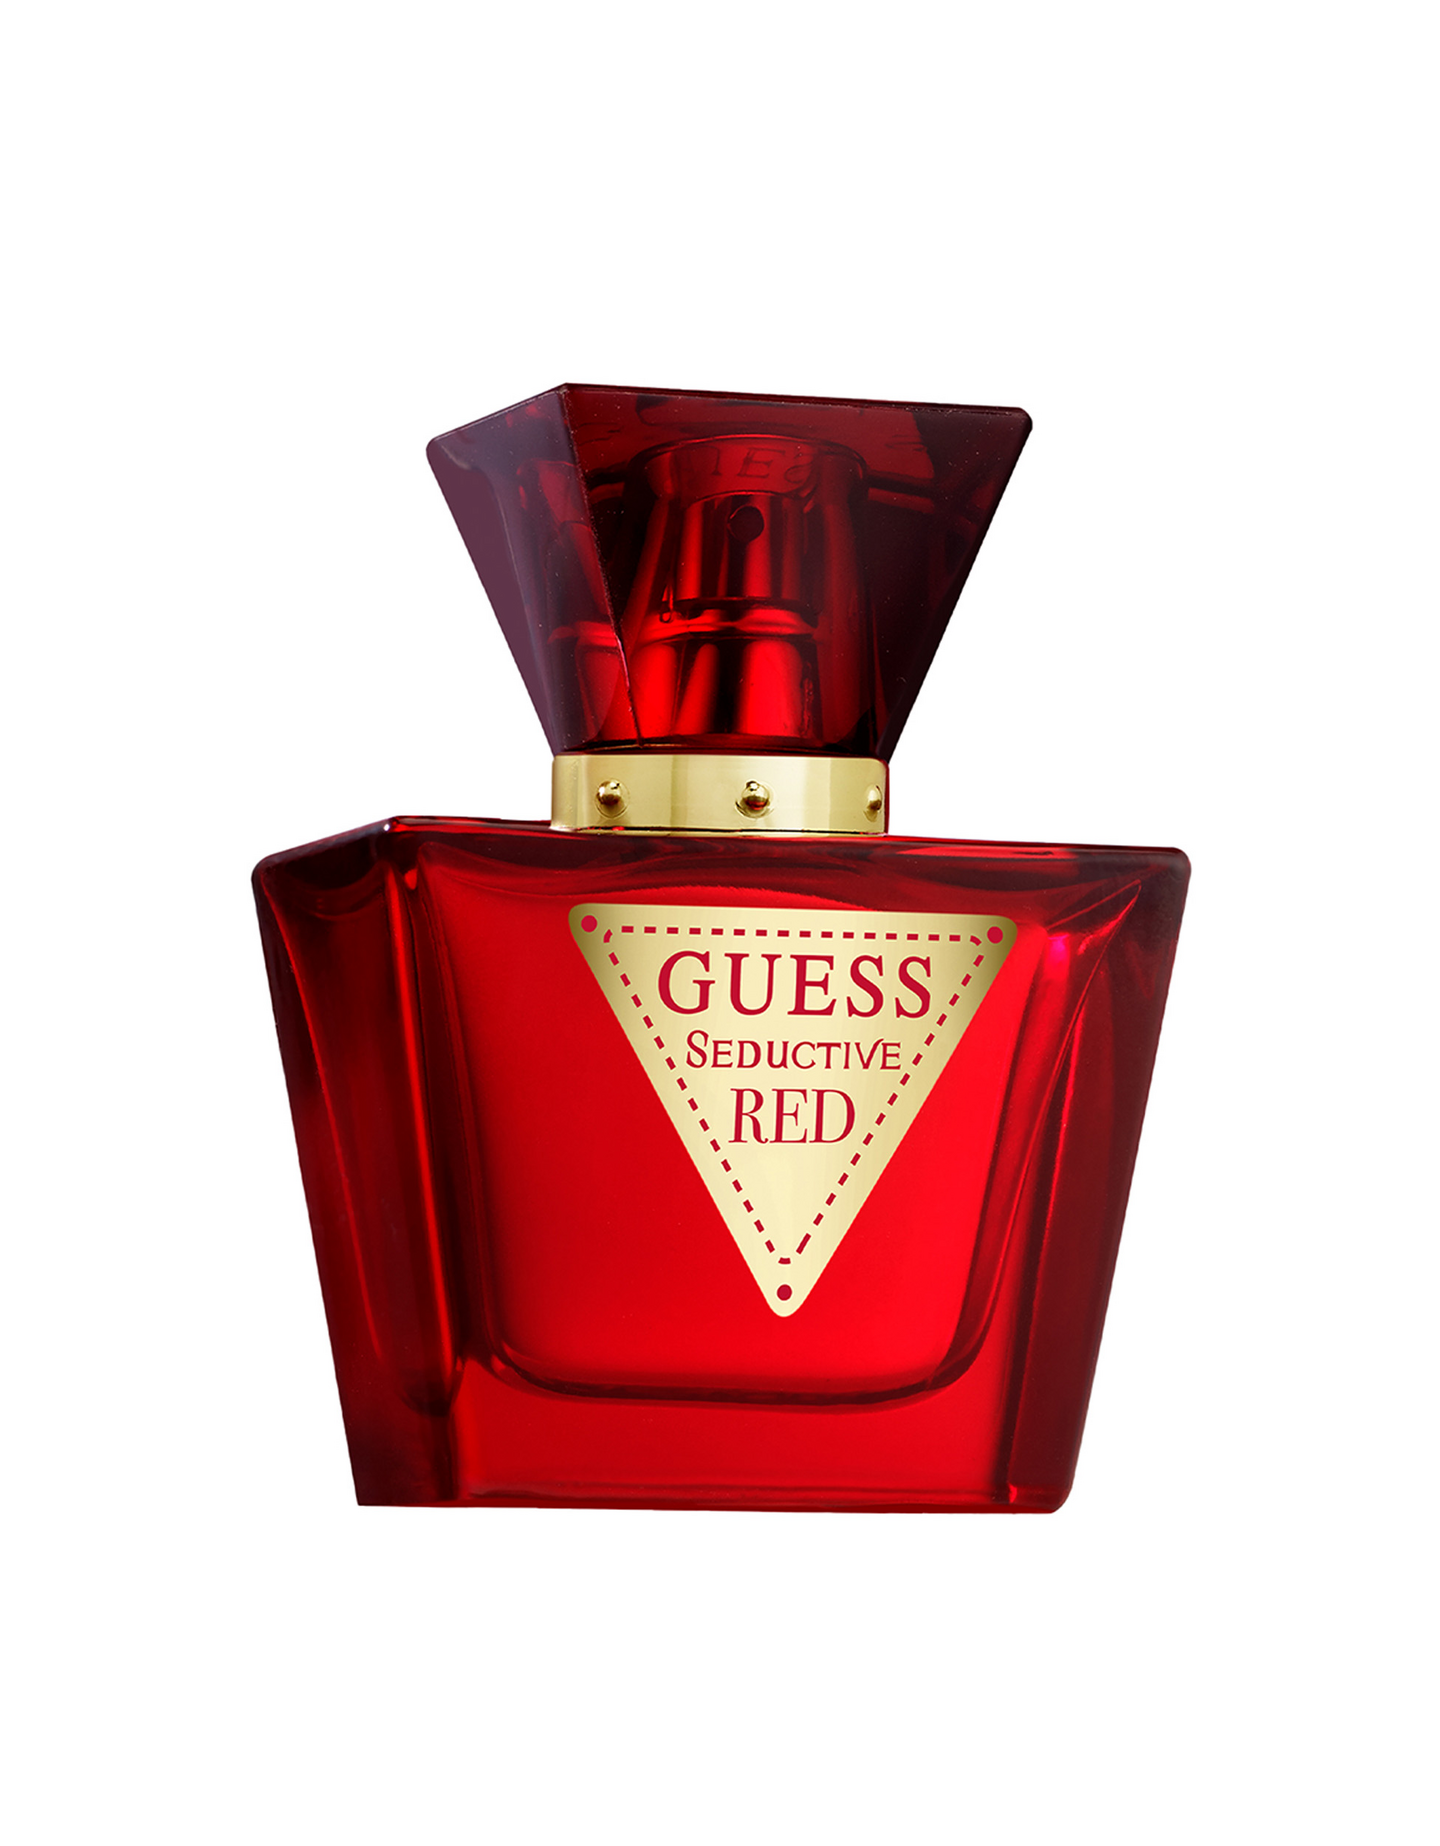 Guess Seductive Red for women EdT 30ml